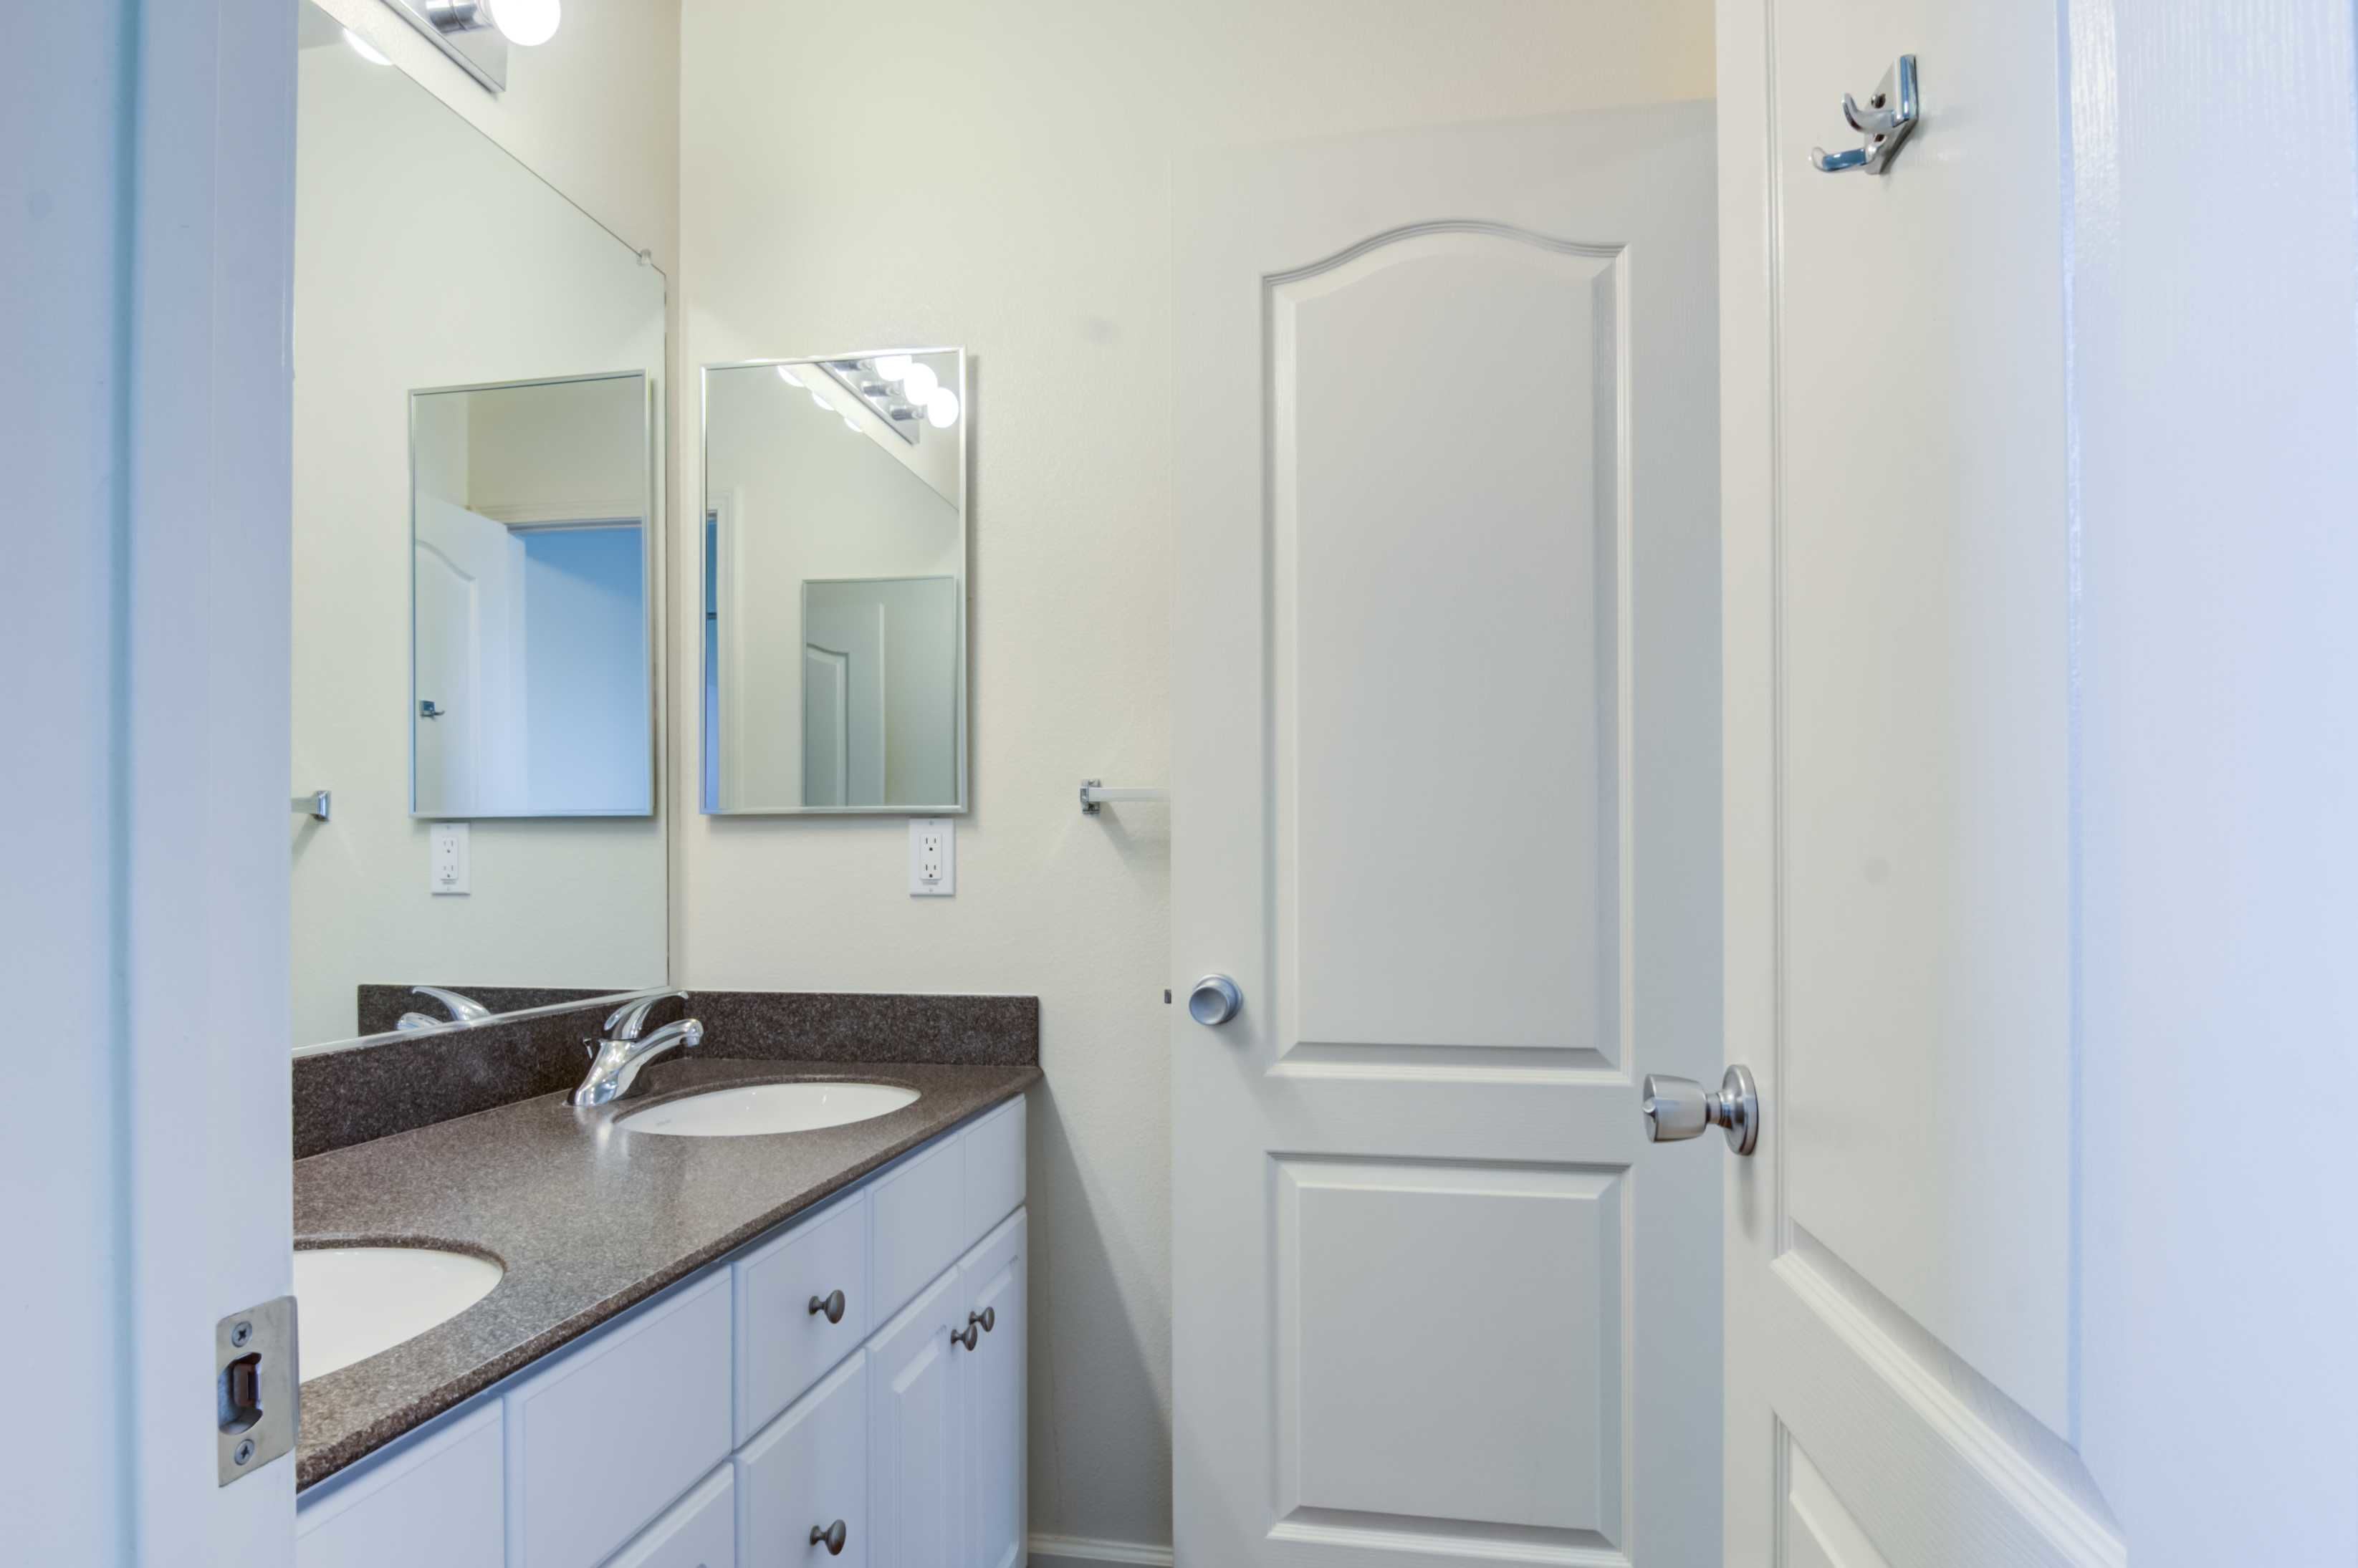 The bathroom in the main bedroom of a home at San Luis Rey in Oceanside, California